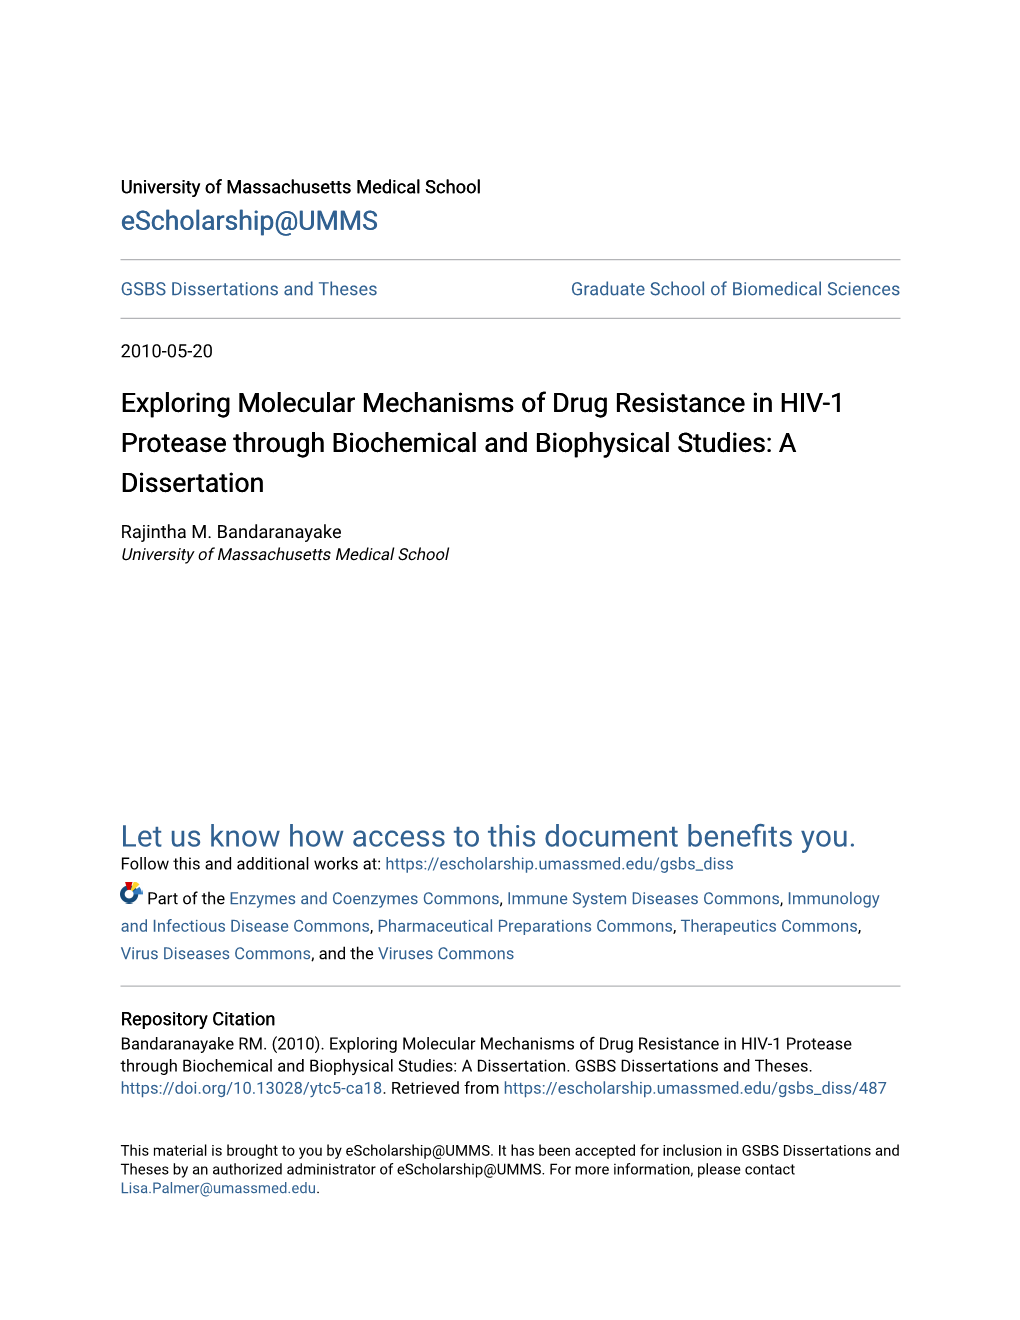 Exploring Molecular Mechanisms of Drug Resistance in HIV-1 Protease Through Biochemical and Biophysical Studies: a Dissertation